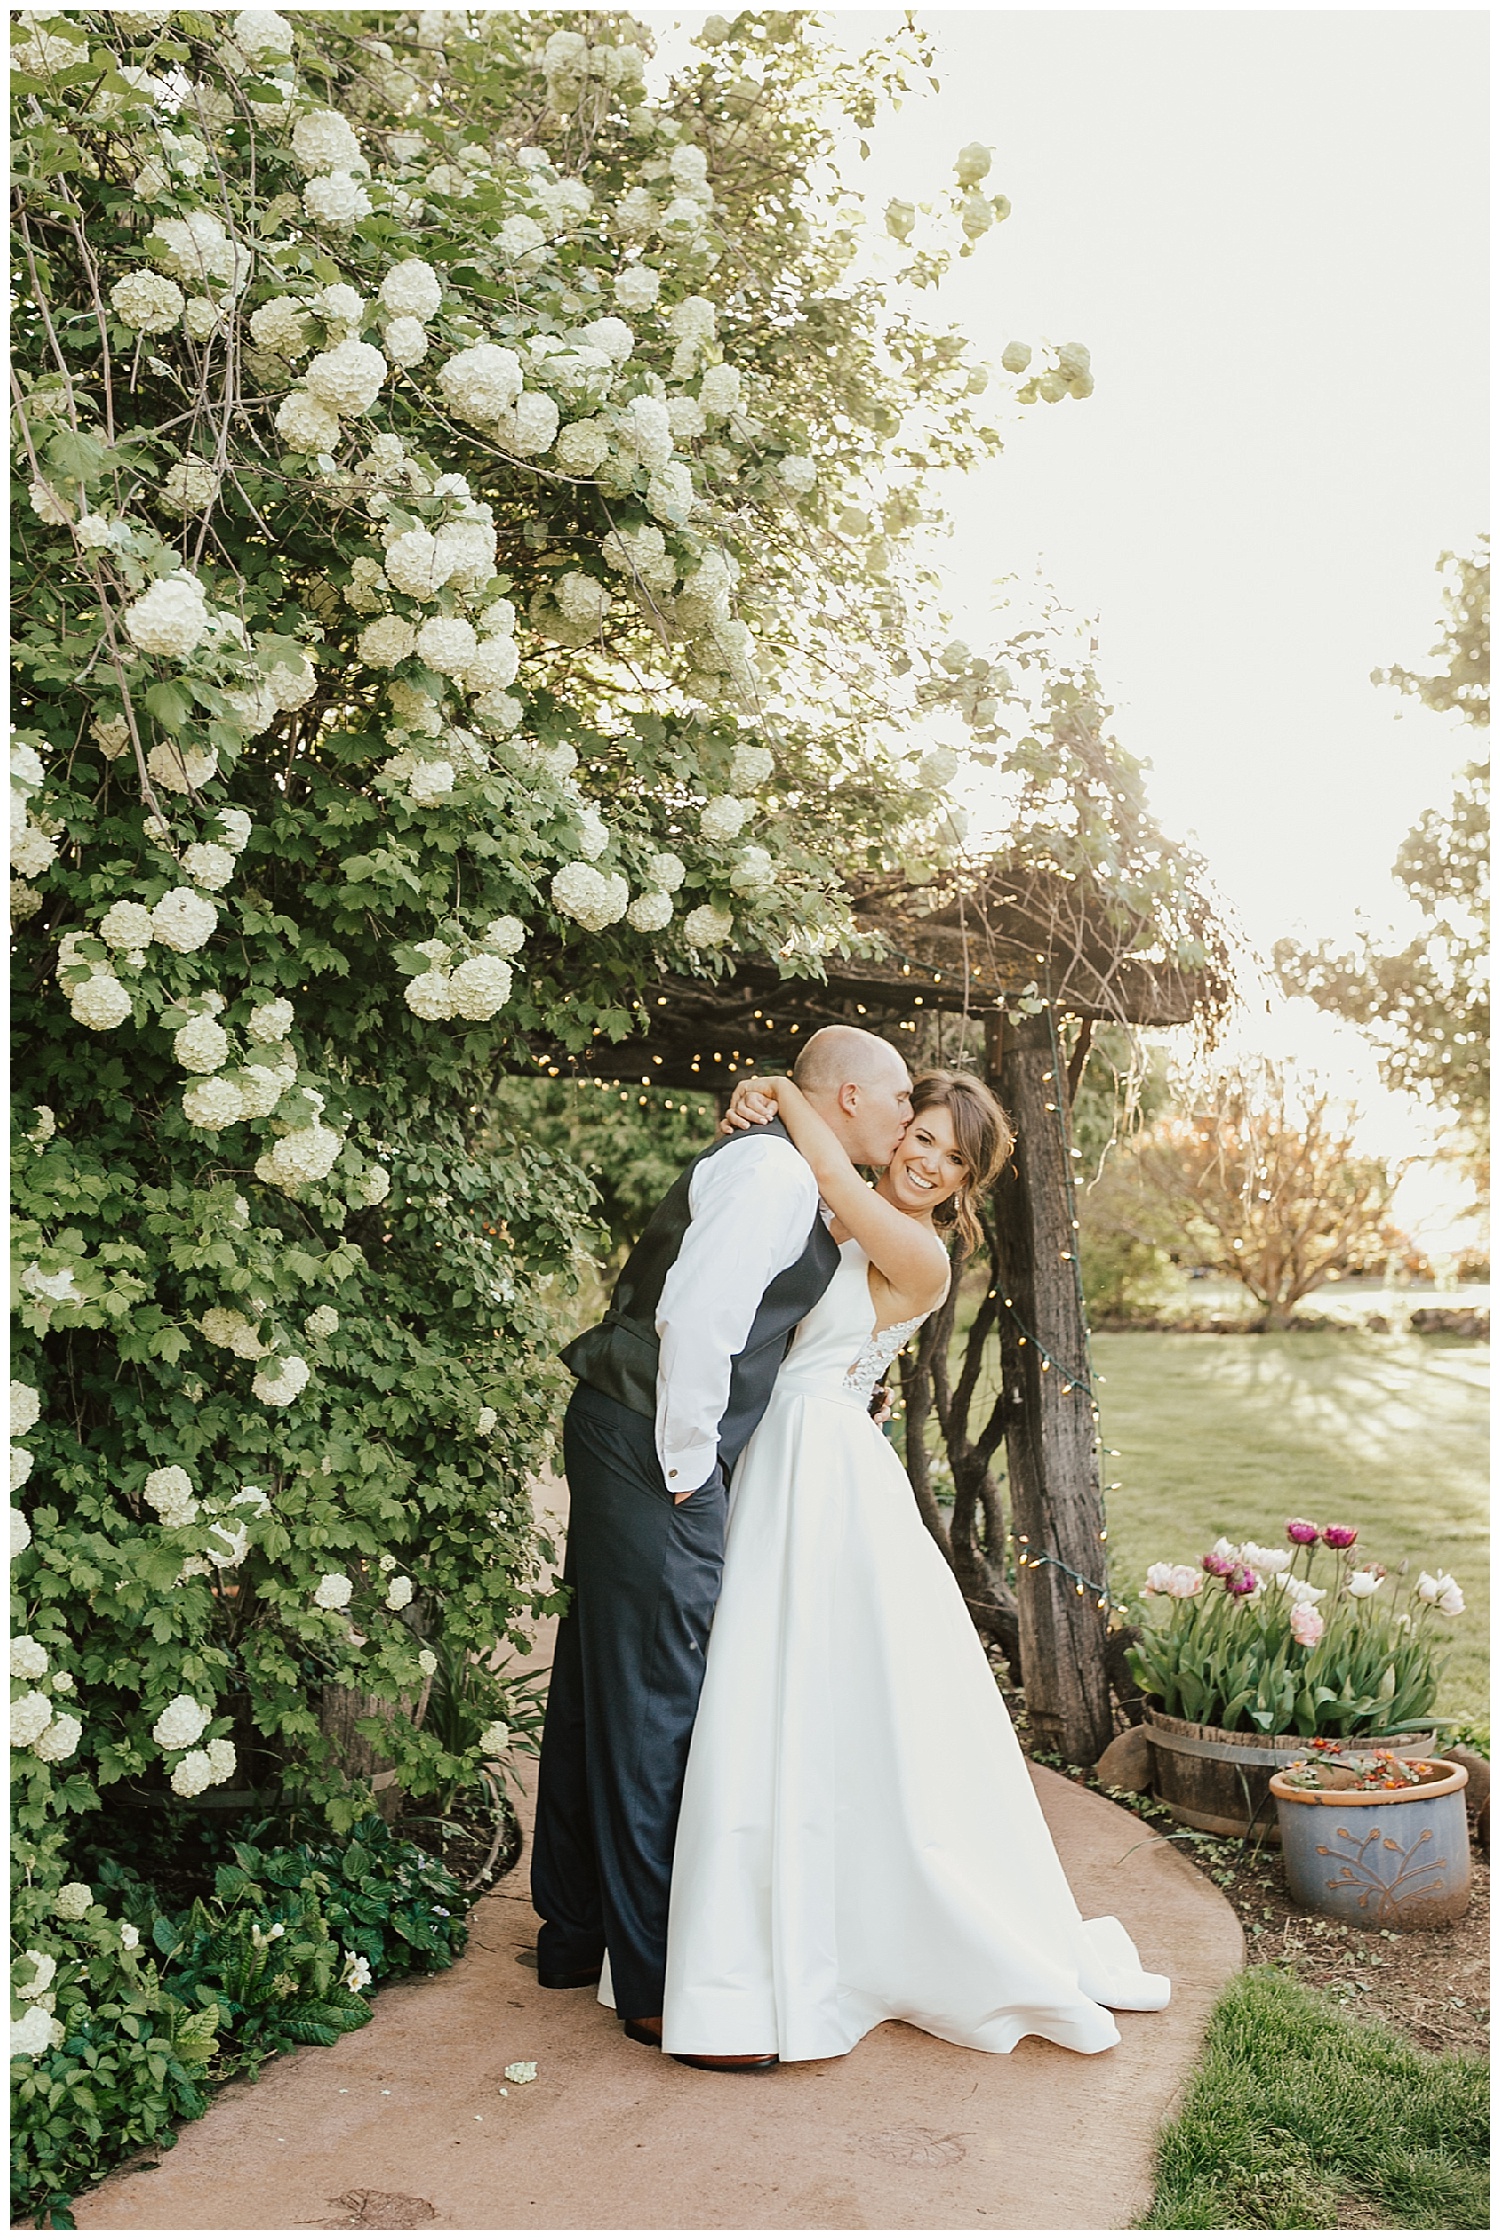 How to make your wedding day environmentally sustainable? - Kristen & Dustin  — Meg's Marvels Photography